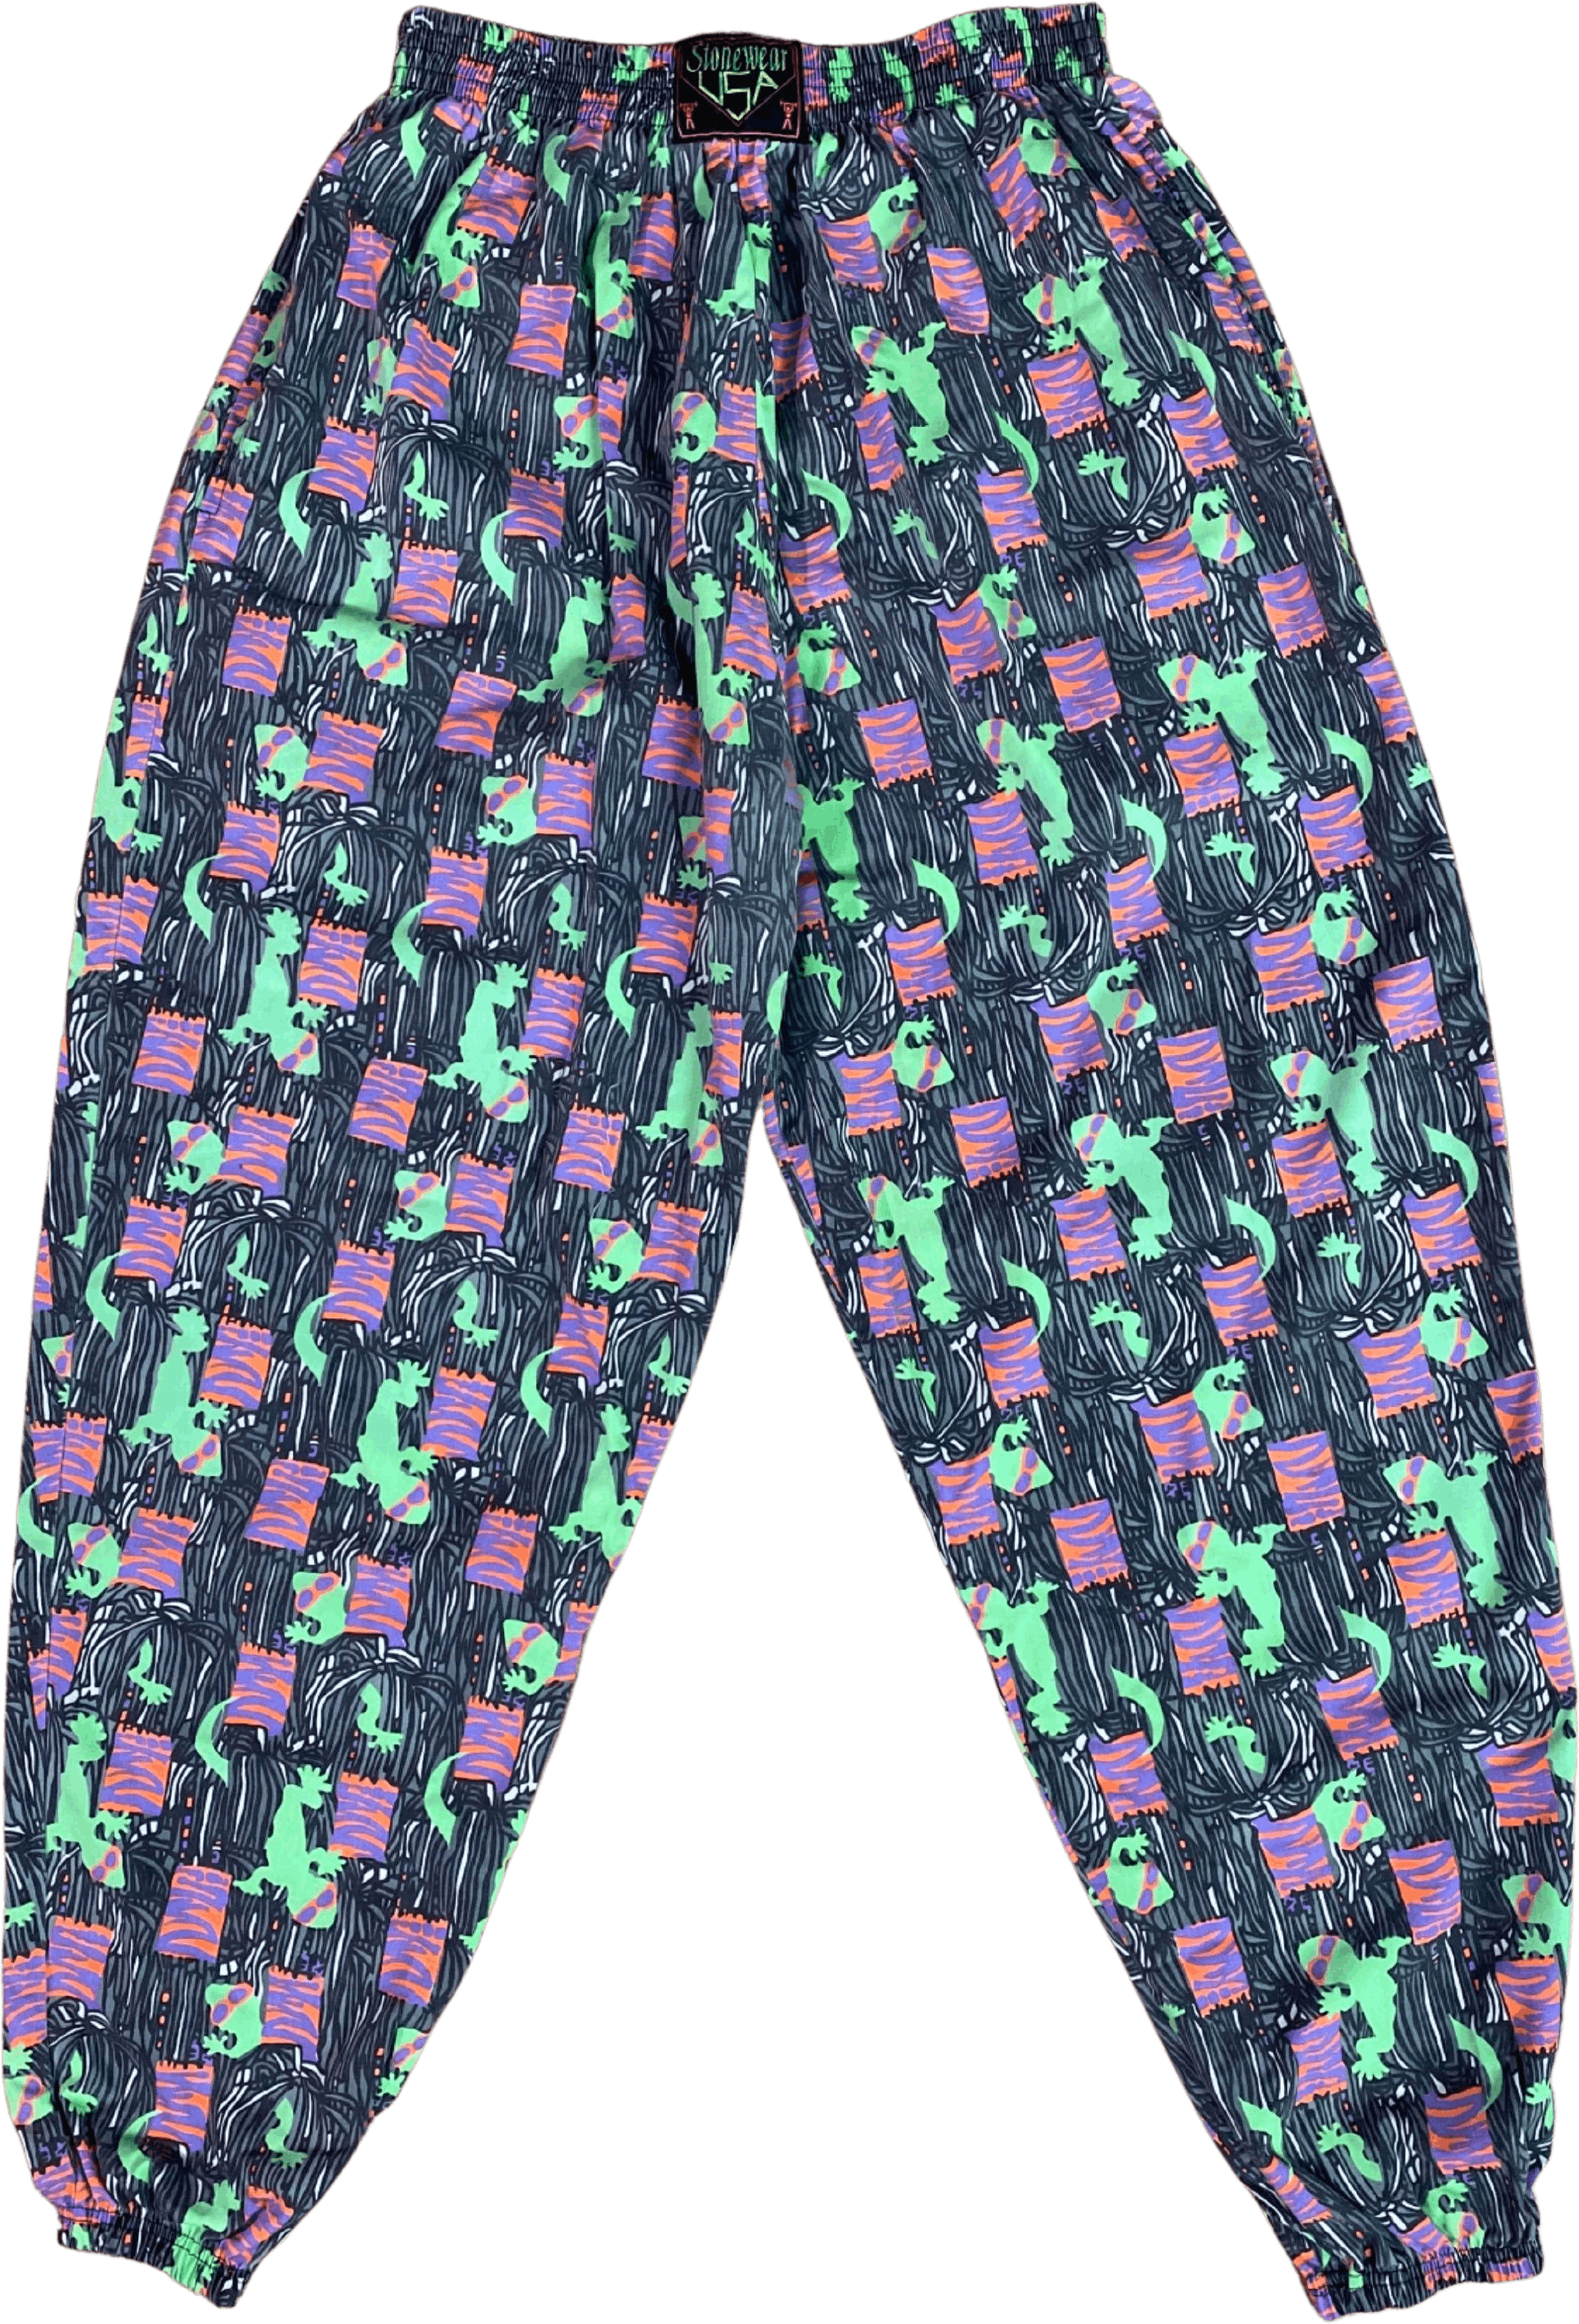 Vintage 80s/90s MOMENTUM Beach Jams Pants Muscle Parachute Baggy Neon  Day-Glo